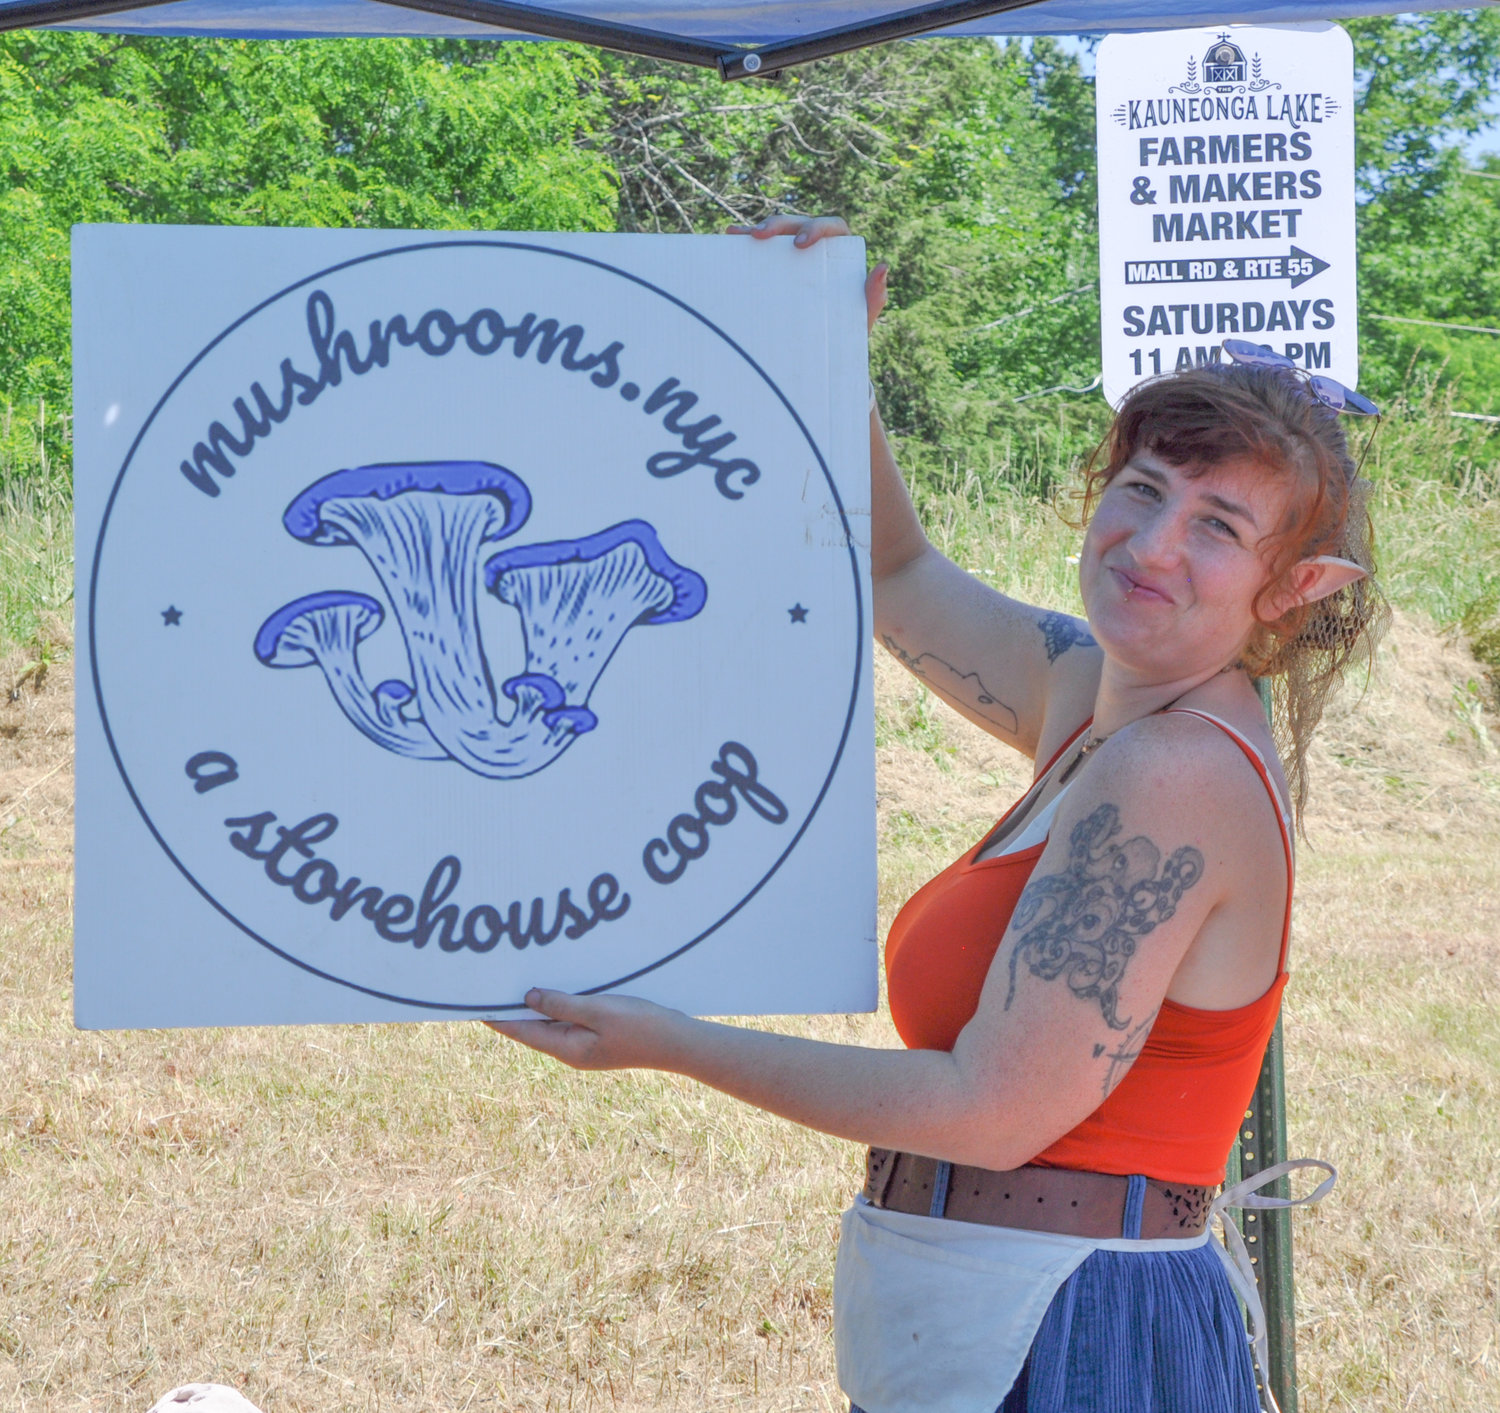 Mushroom vendor Rhea Wright was all ears listening to the live music wafting through the air at the grand opening of the newly rebranded Kauneonga Lake Farmers and Makers Market in Bethel, NY.